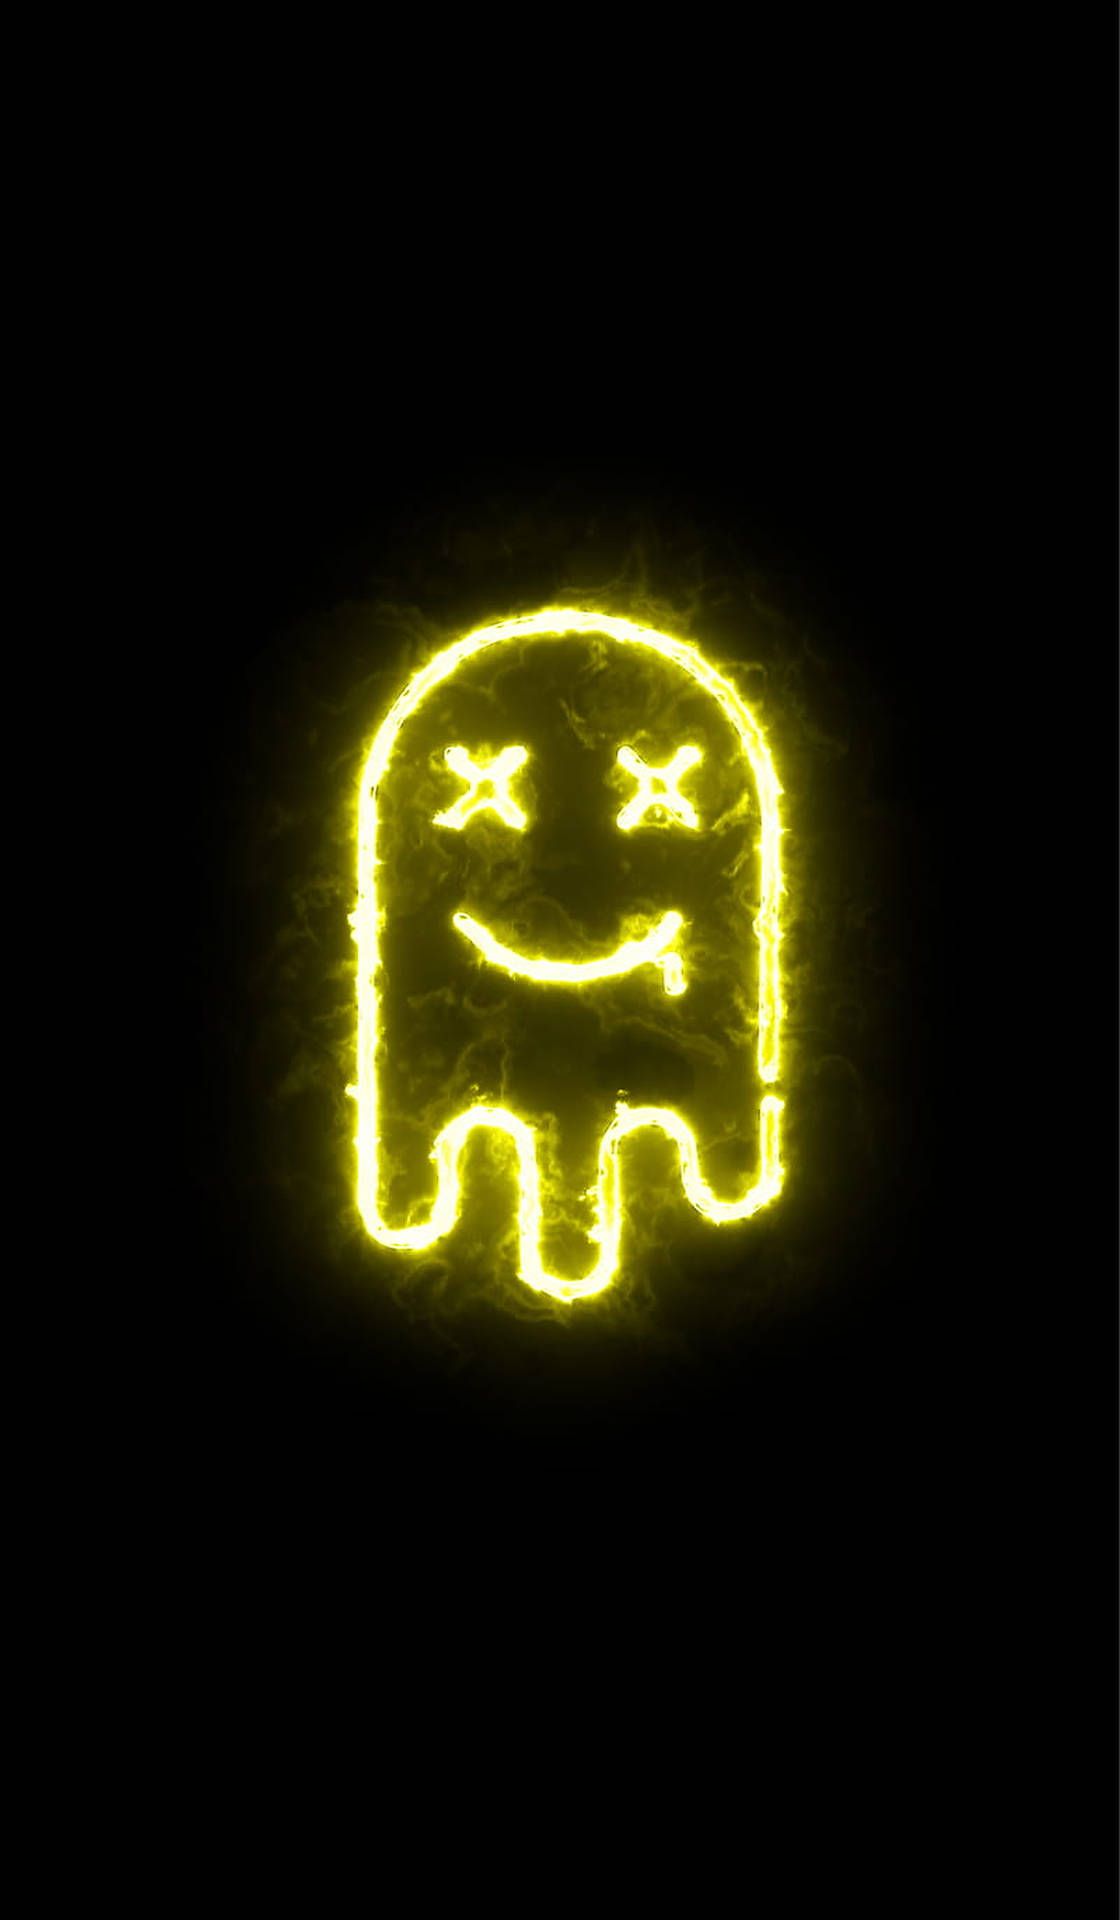 A yellow smiley face on black background - Light yellow